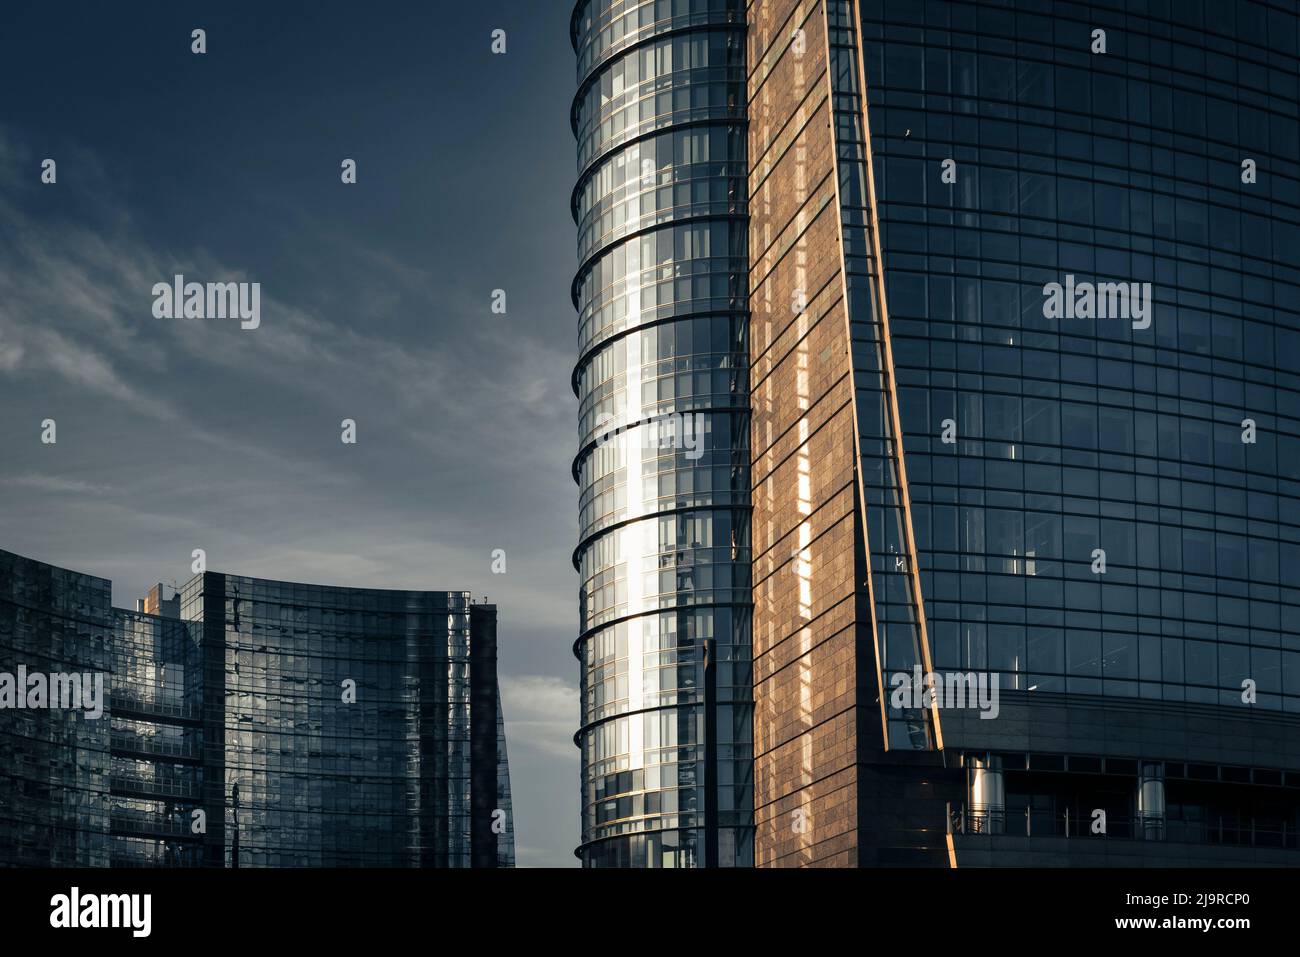 Modern and minimal architecture made by steel and glass. Skyscrapers reflecting the sunlight. Stock Photo